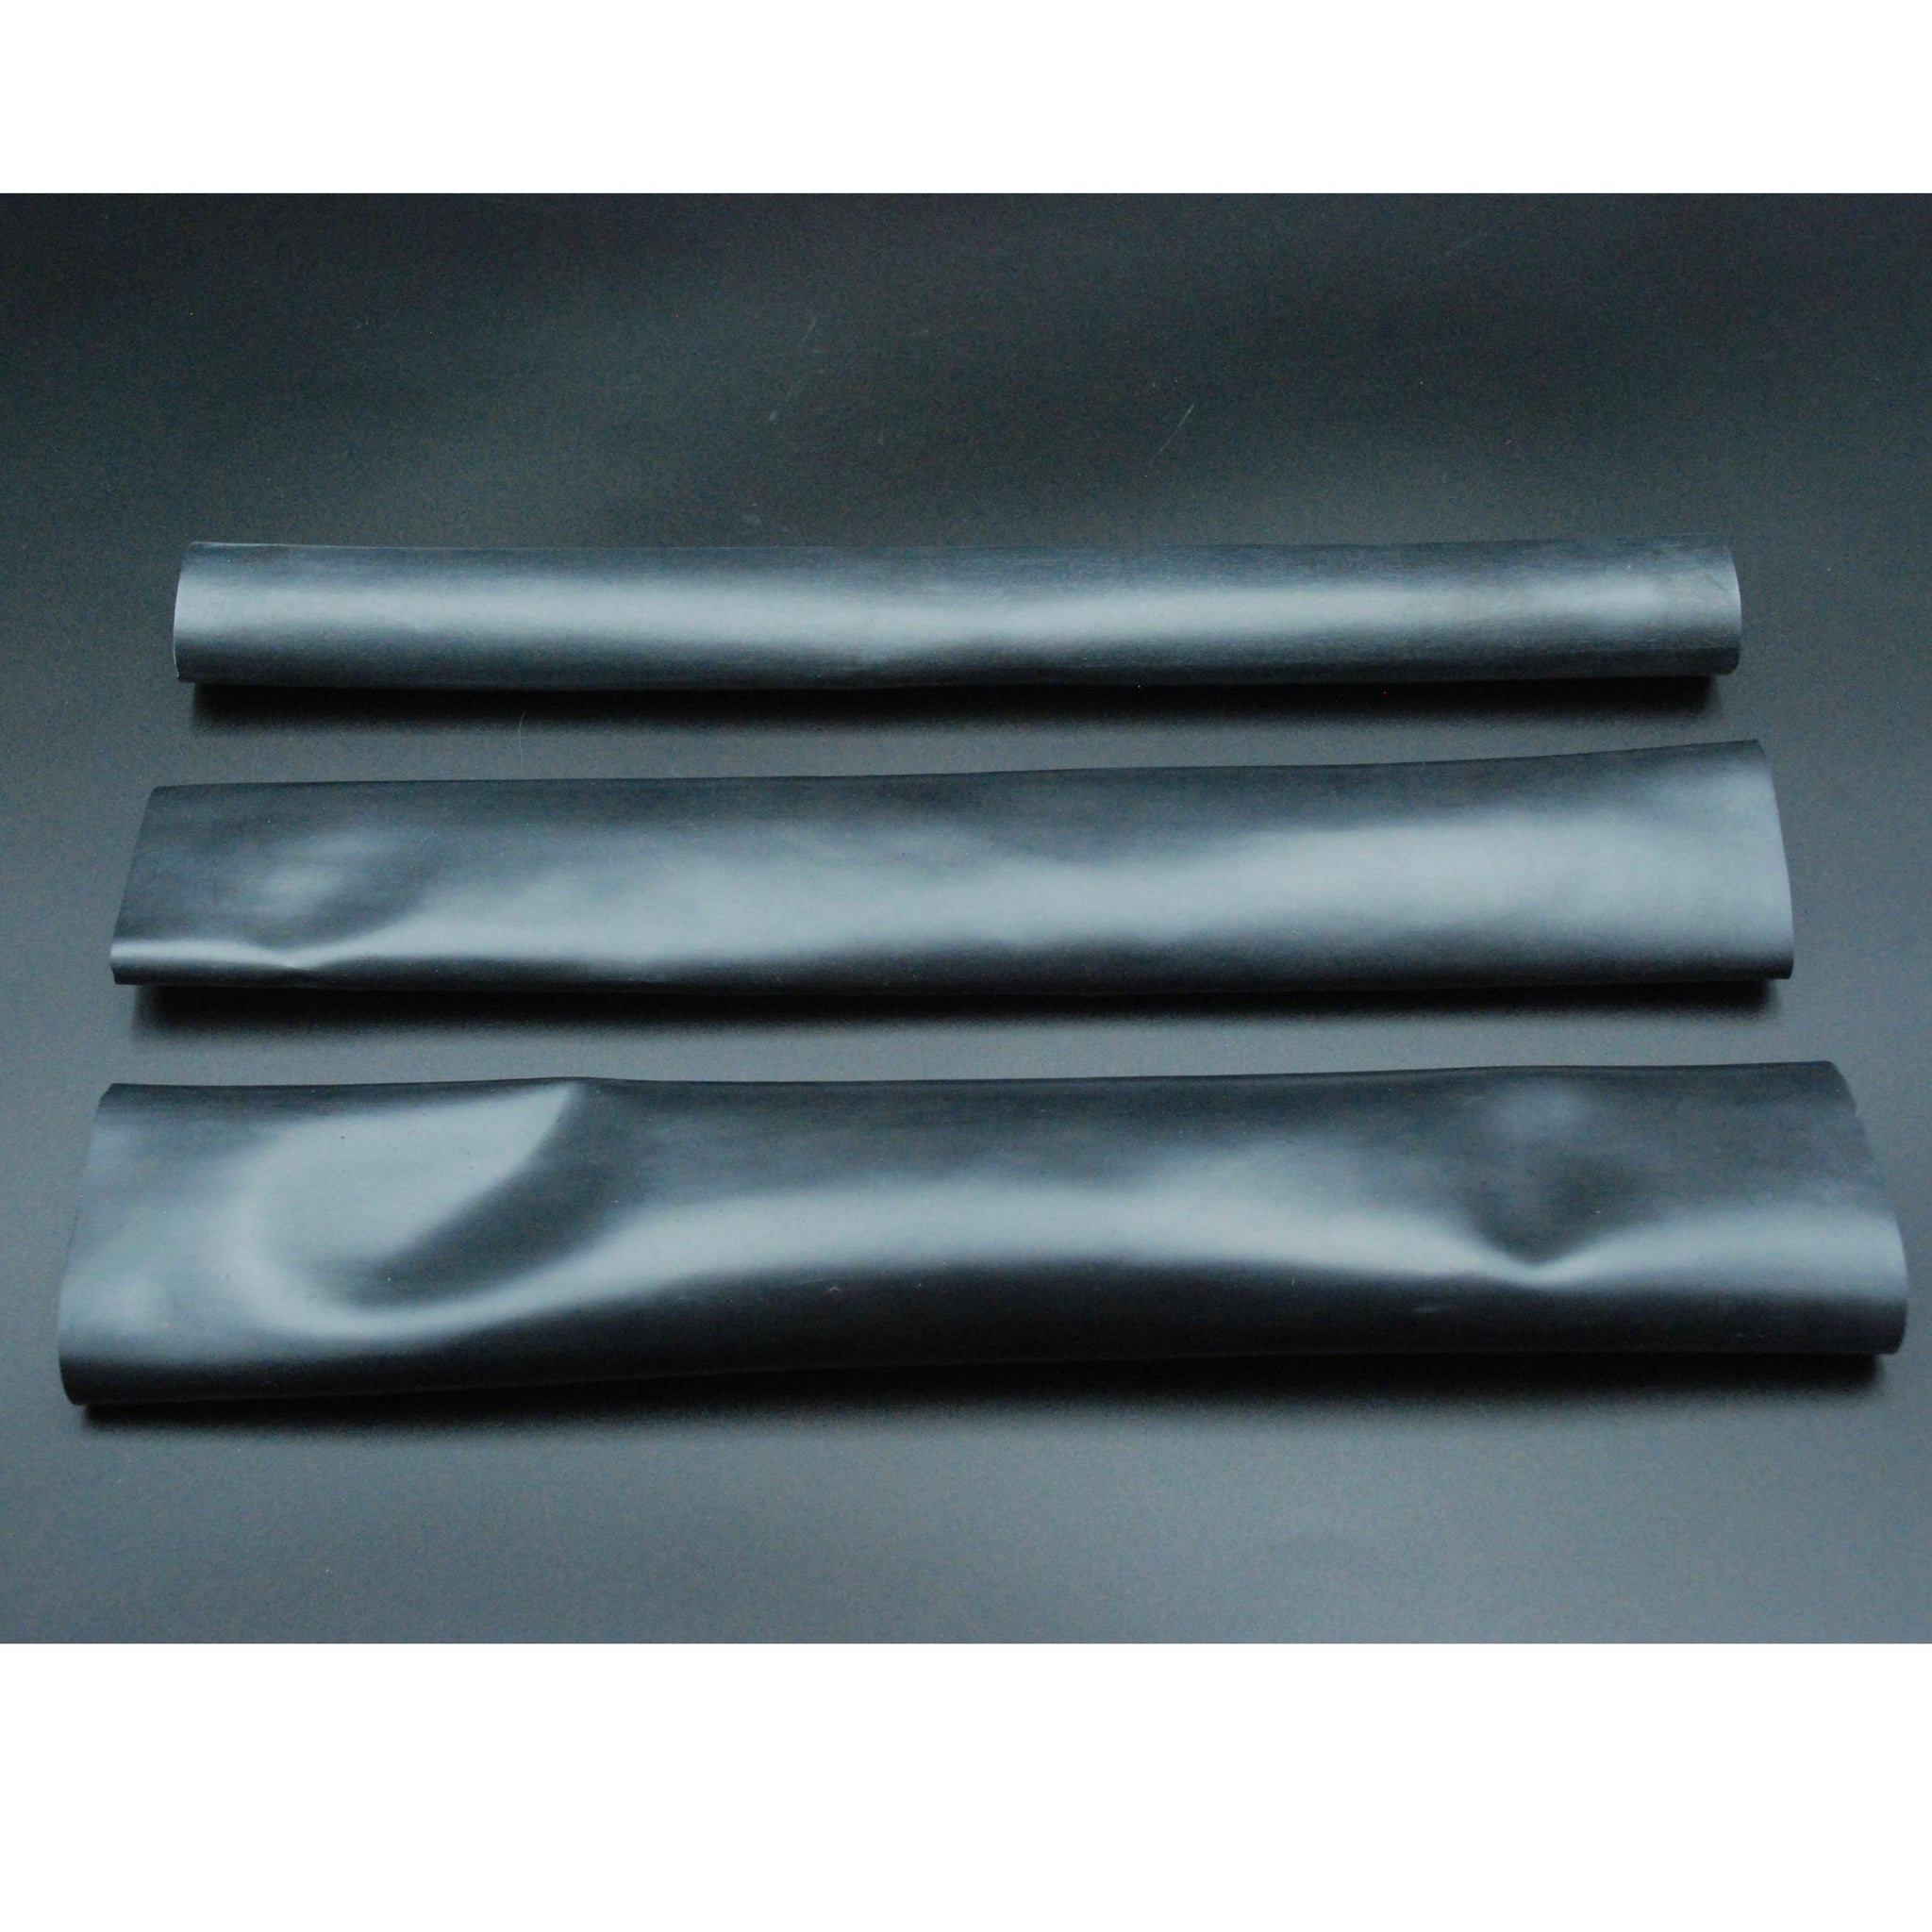 SeriousKit Conductive Liners